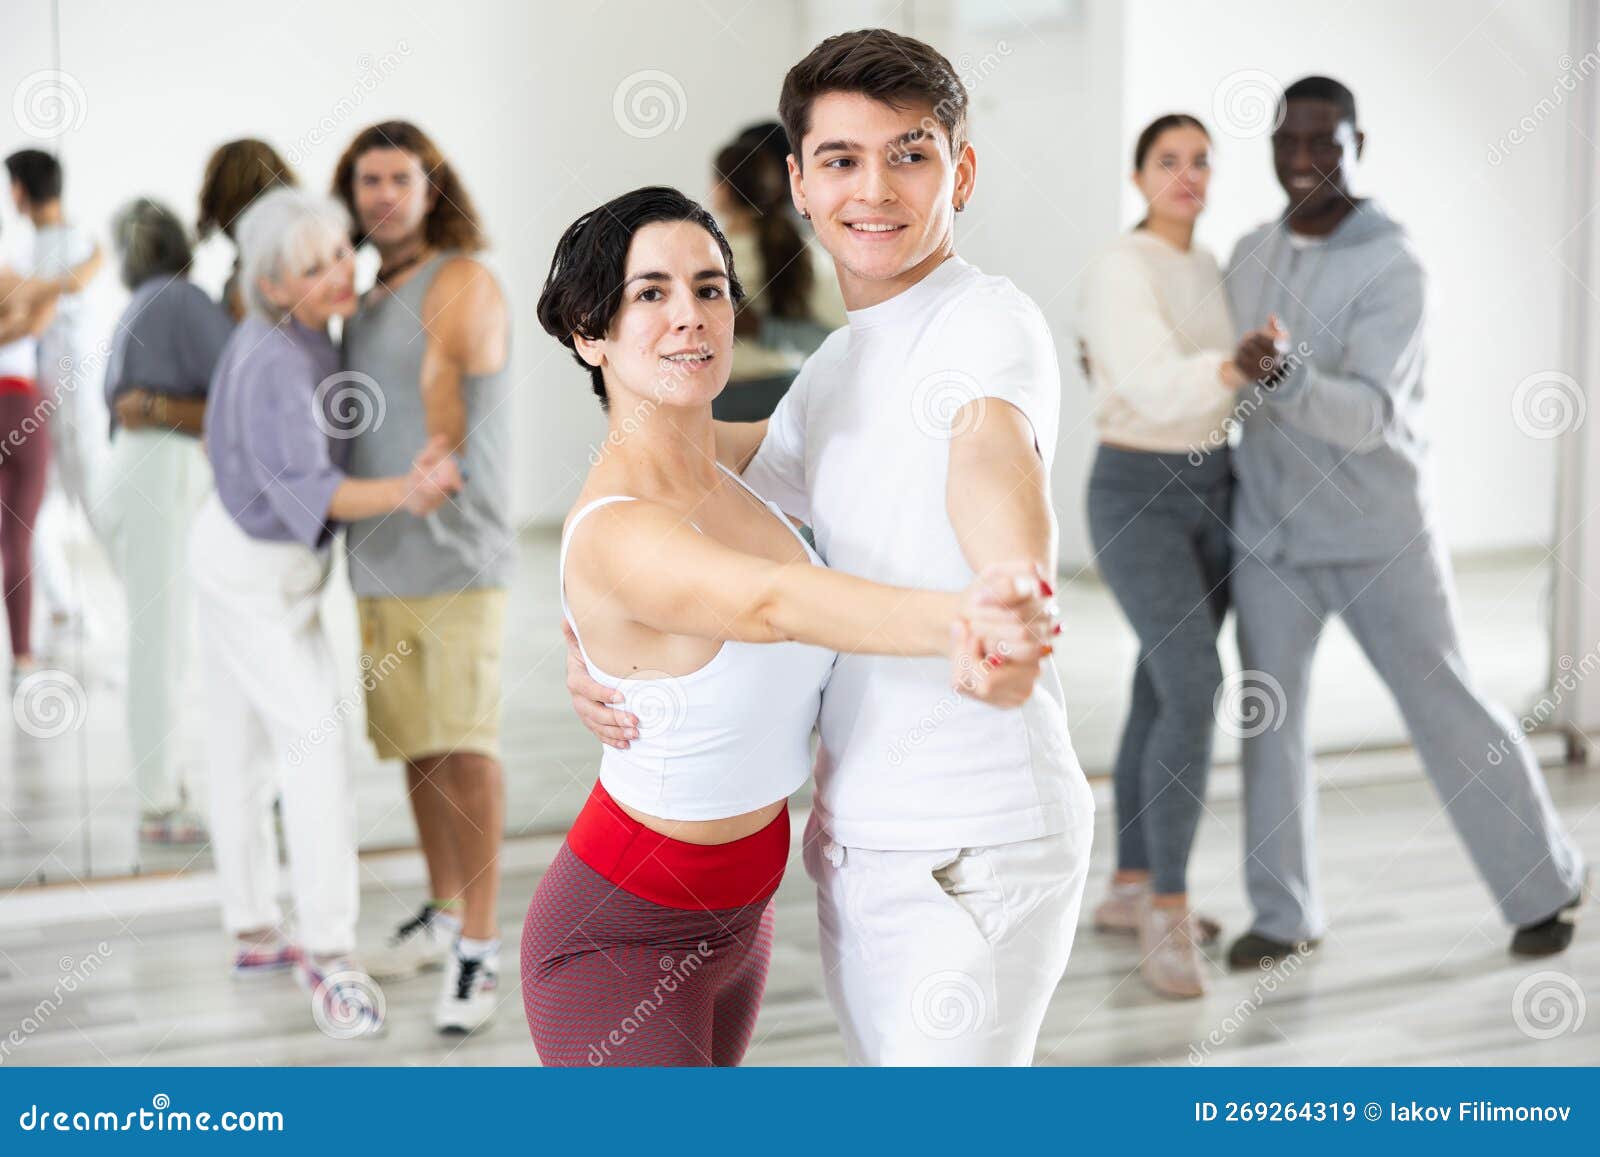 Hispanic Woman And Guy Practicing Slow Ballroom Dances In Pair Stock Image Image Of Activity 